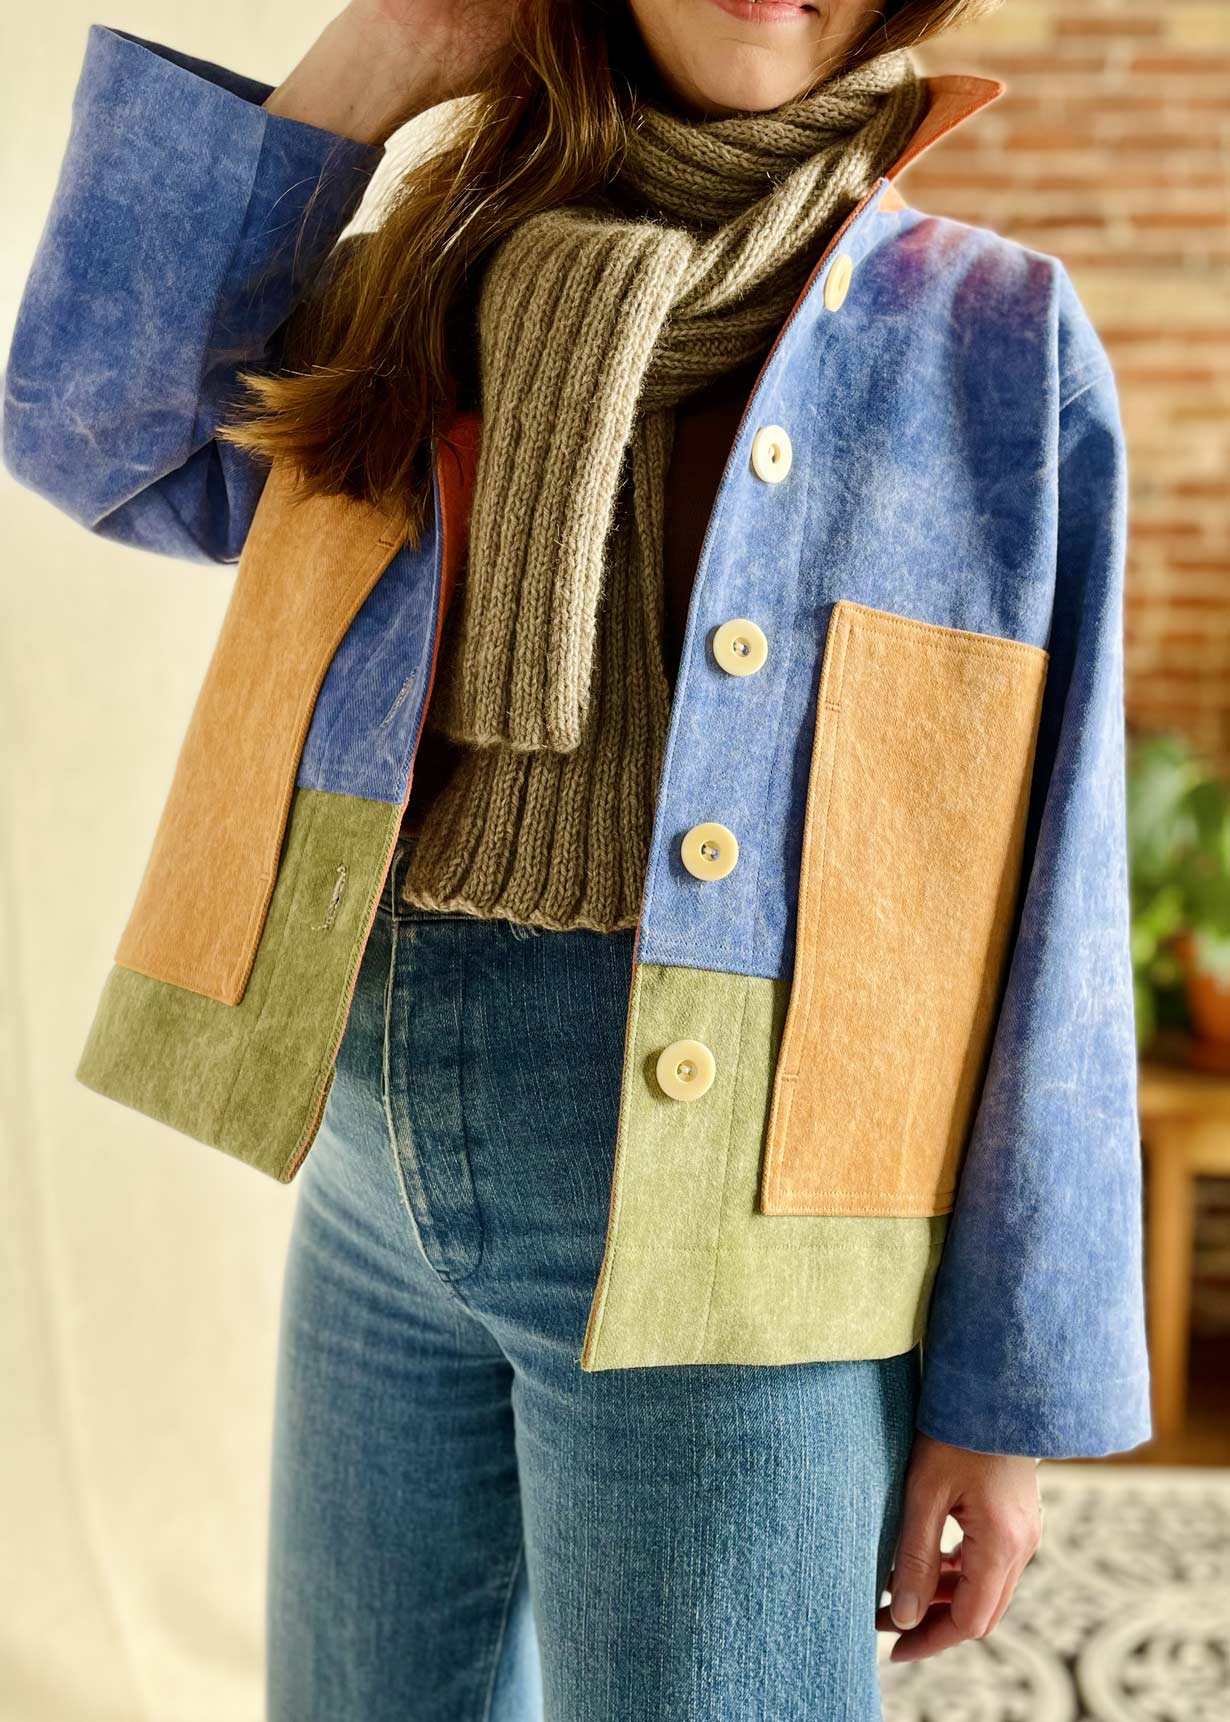 Made-to-order Color Block Jacket: Full color body